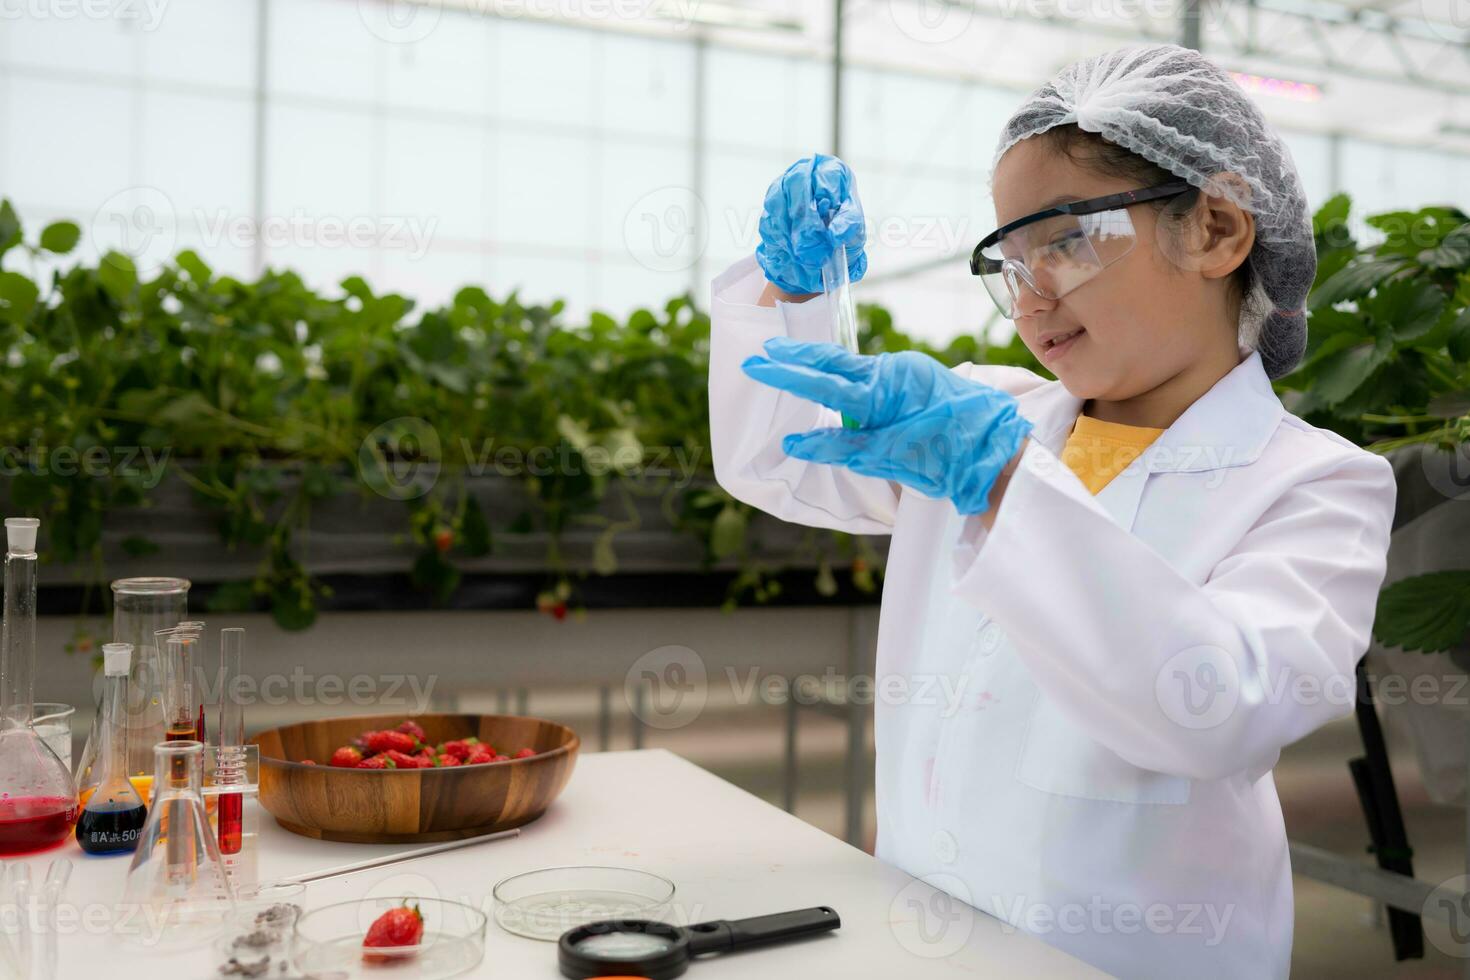 In the closed strawberry garden, a young scientist conducts a strawberry nutrient production experiment with her science class. photo